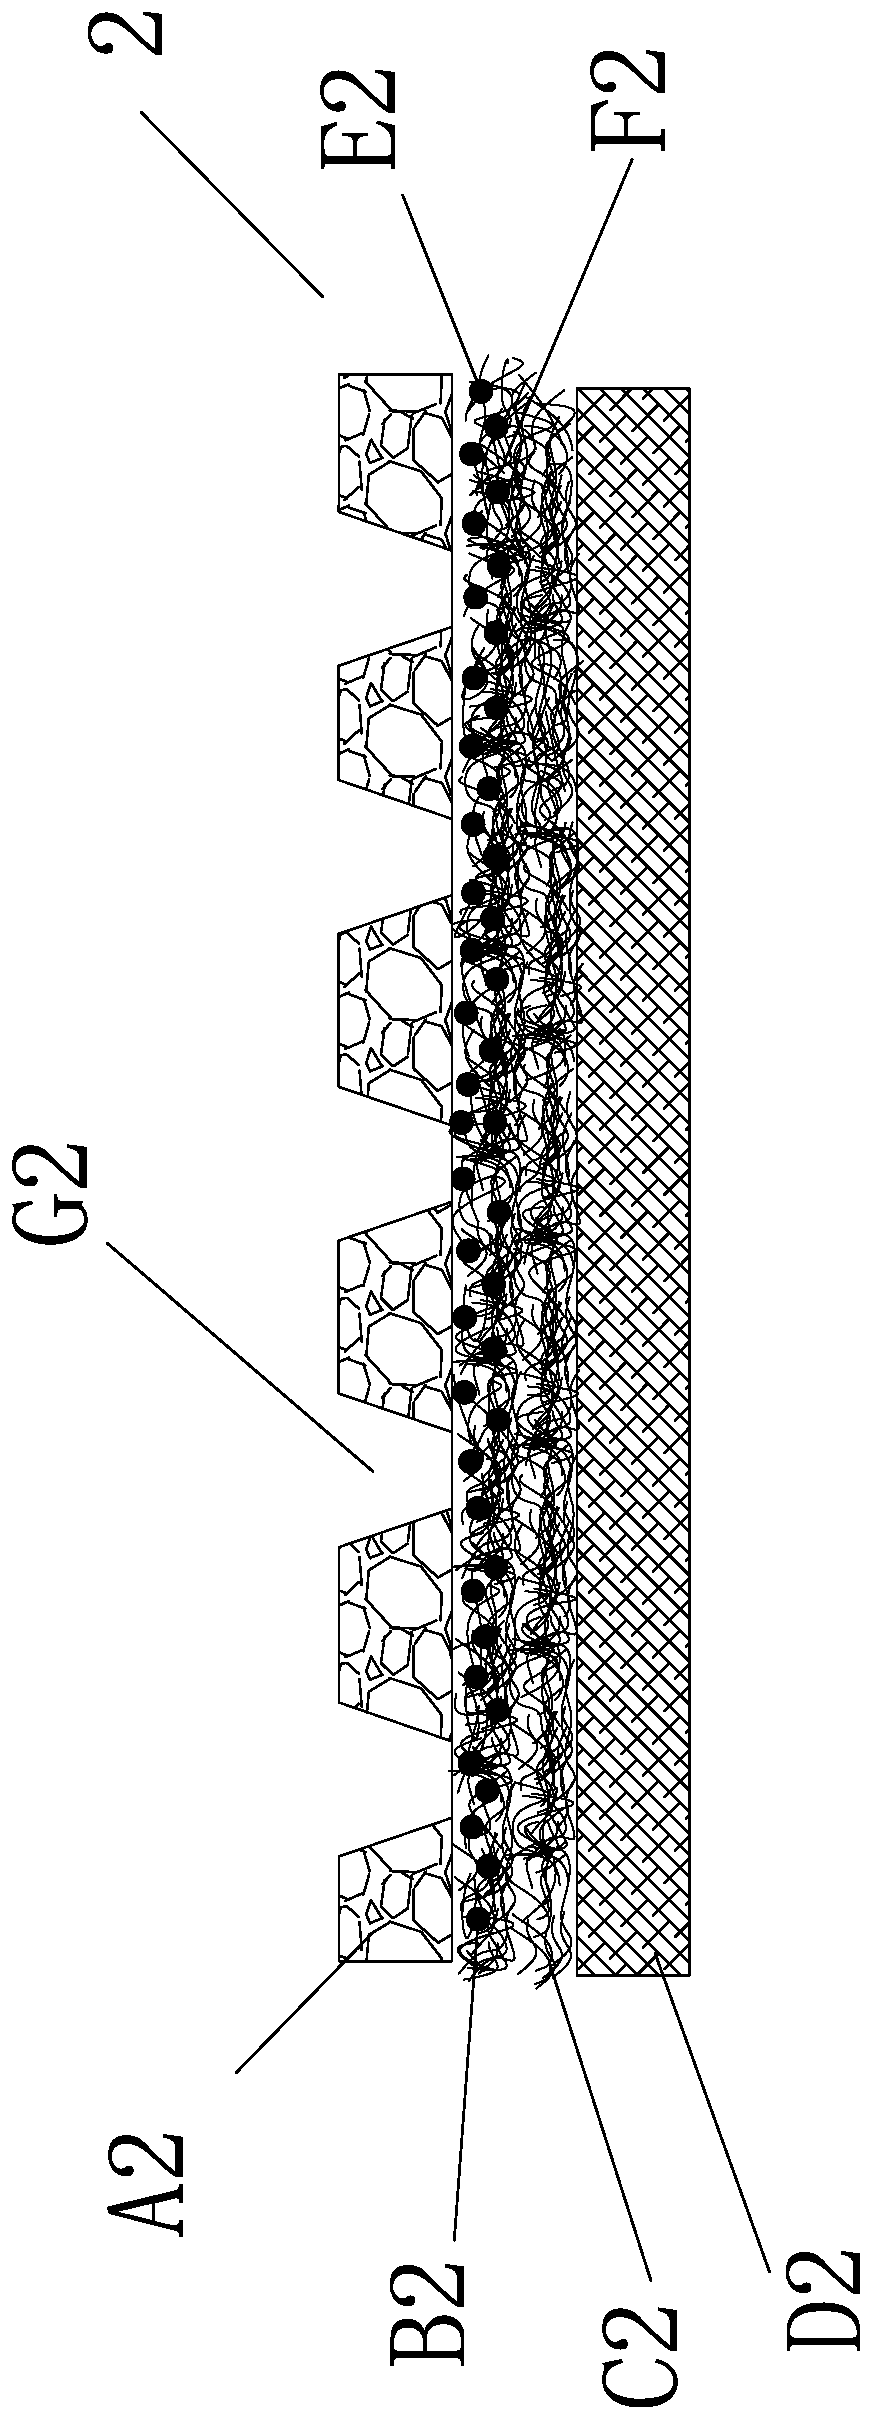 A composite absorbent coil containing a foaming material